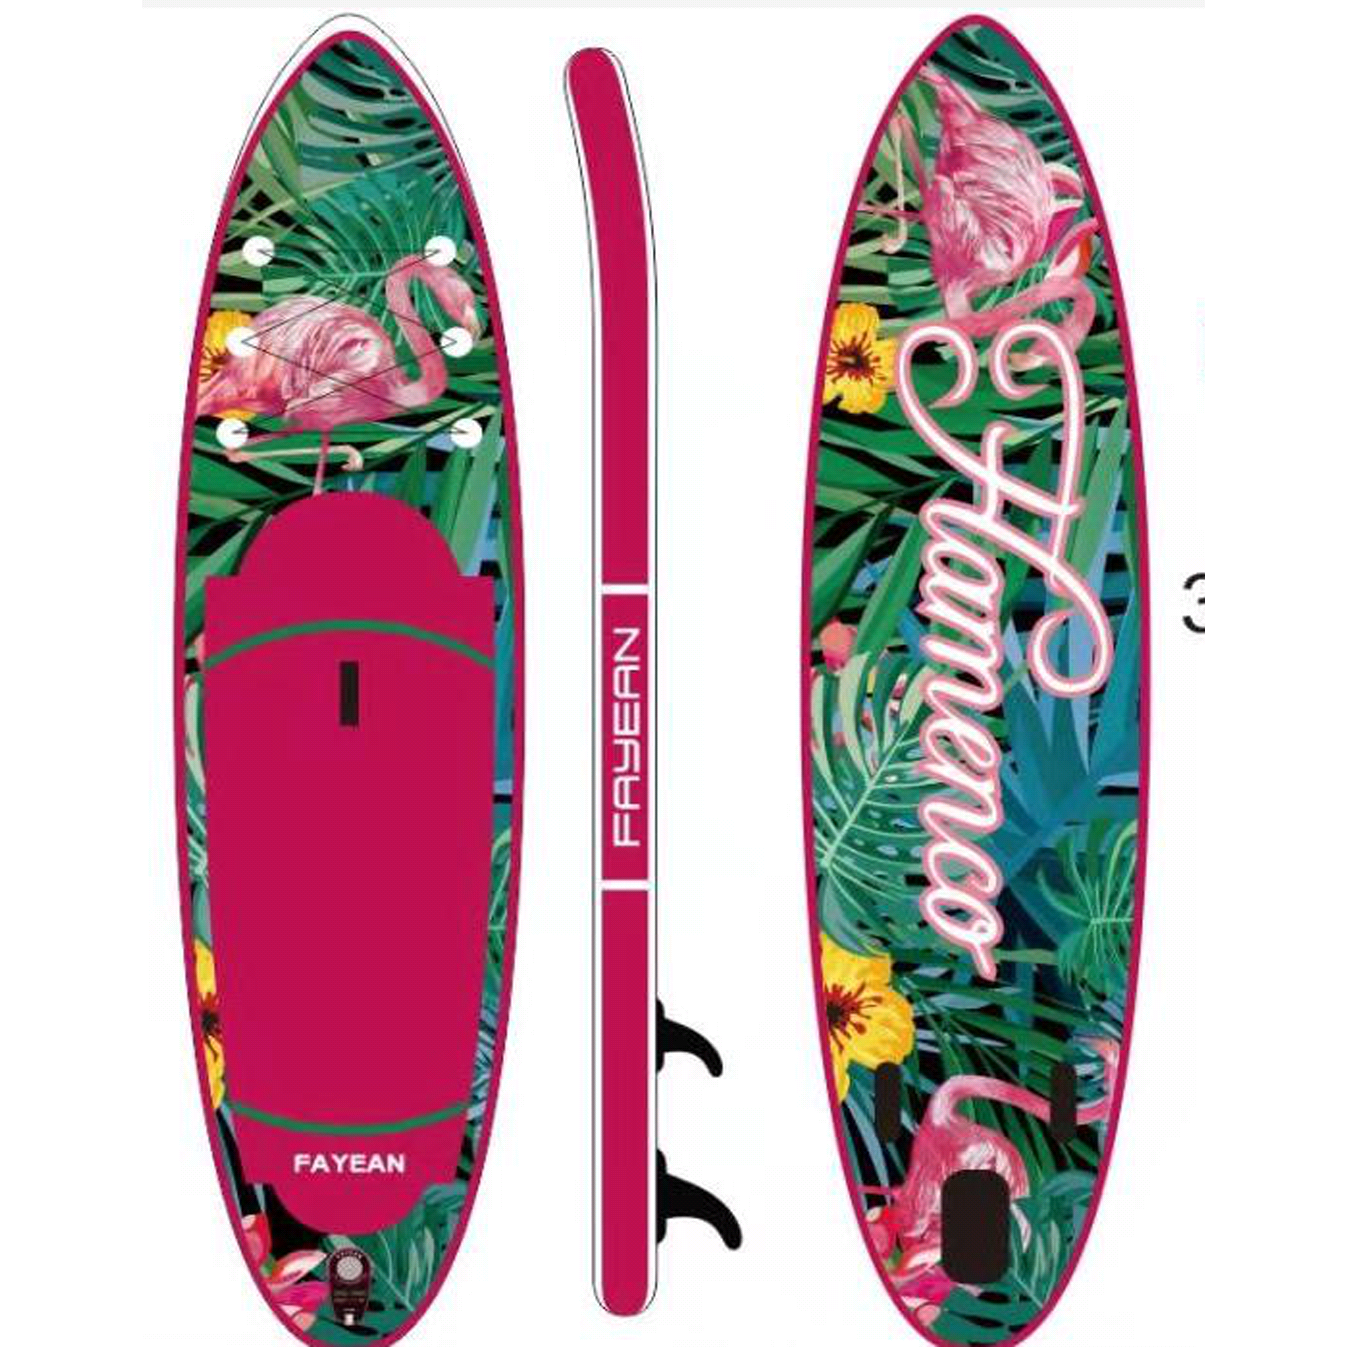 Paddleboard - Fayean Flamenco - 10.6 x 32 x 6 - Pre-order available mid-July - AOC Nautique - Kayak paddleboard